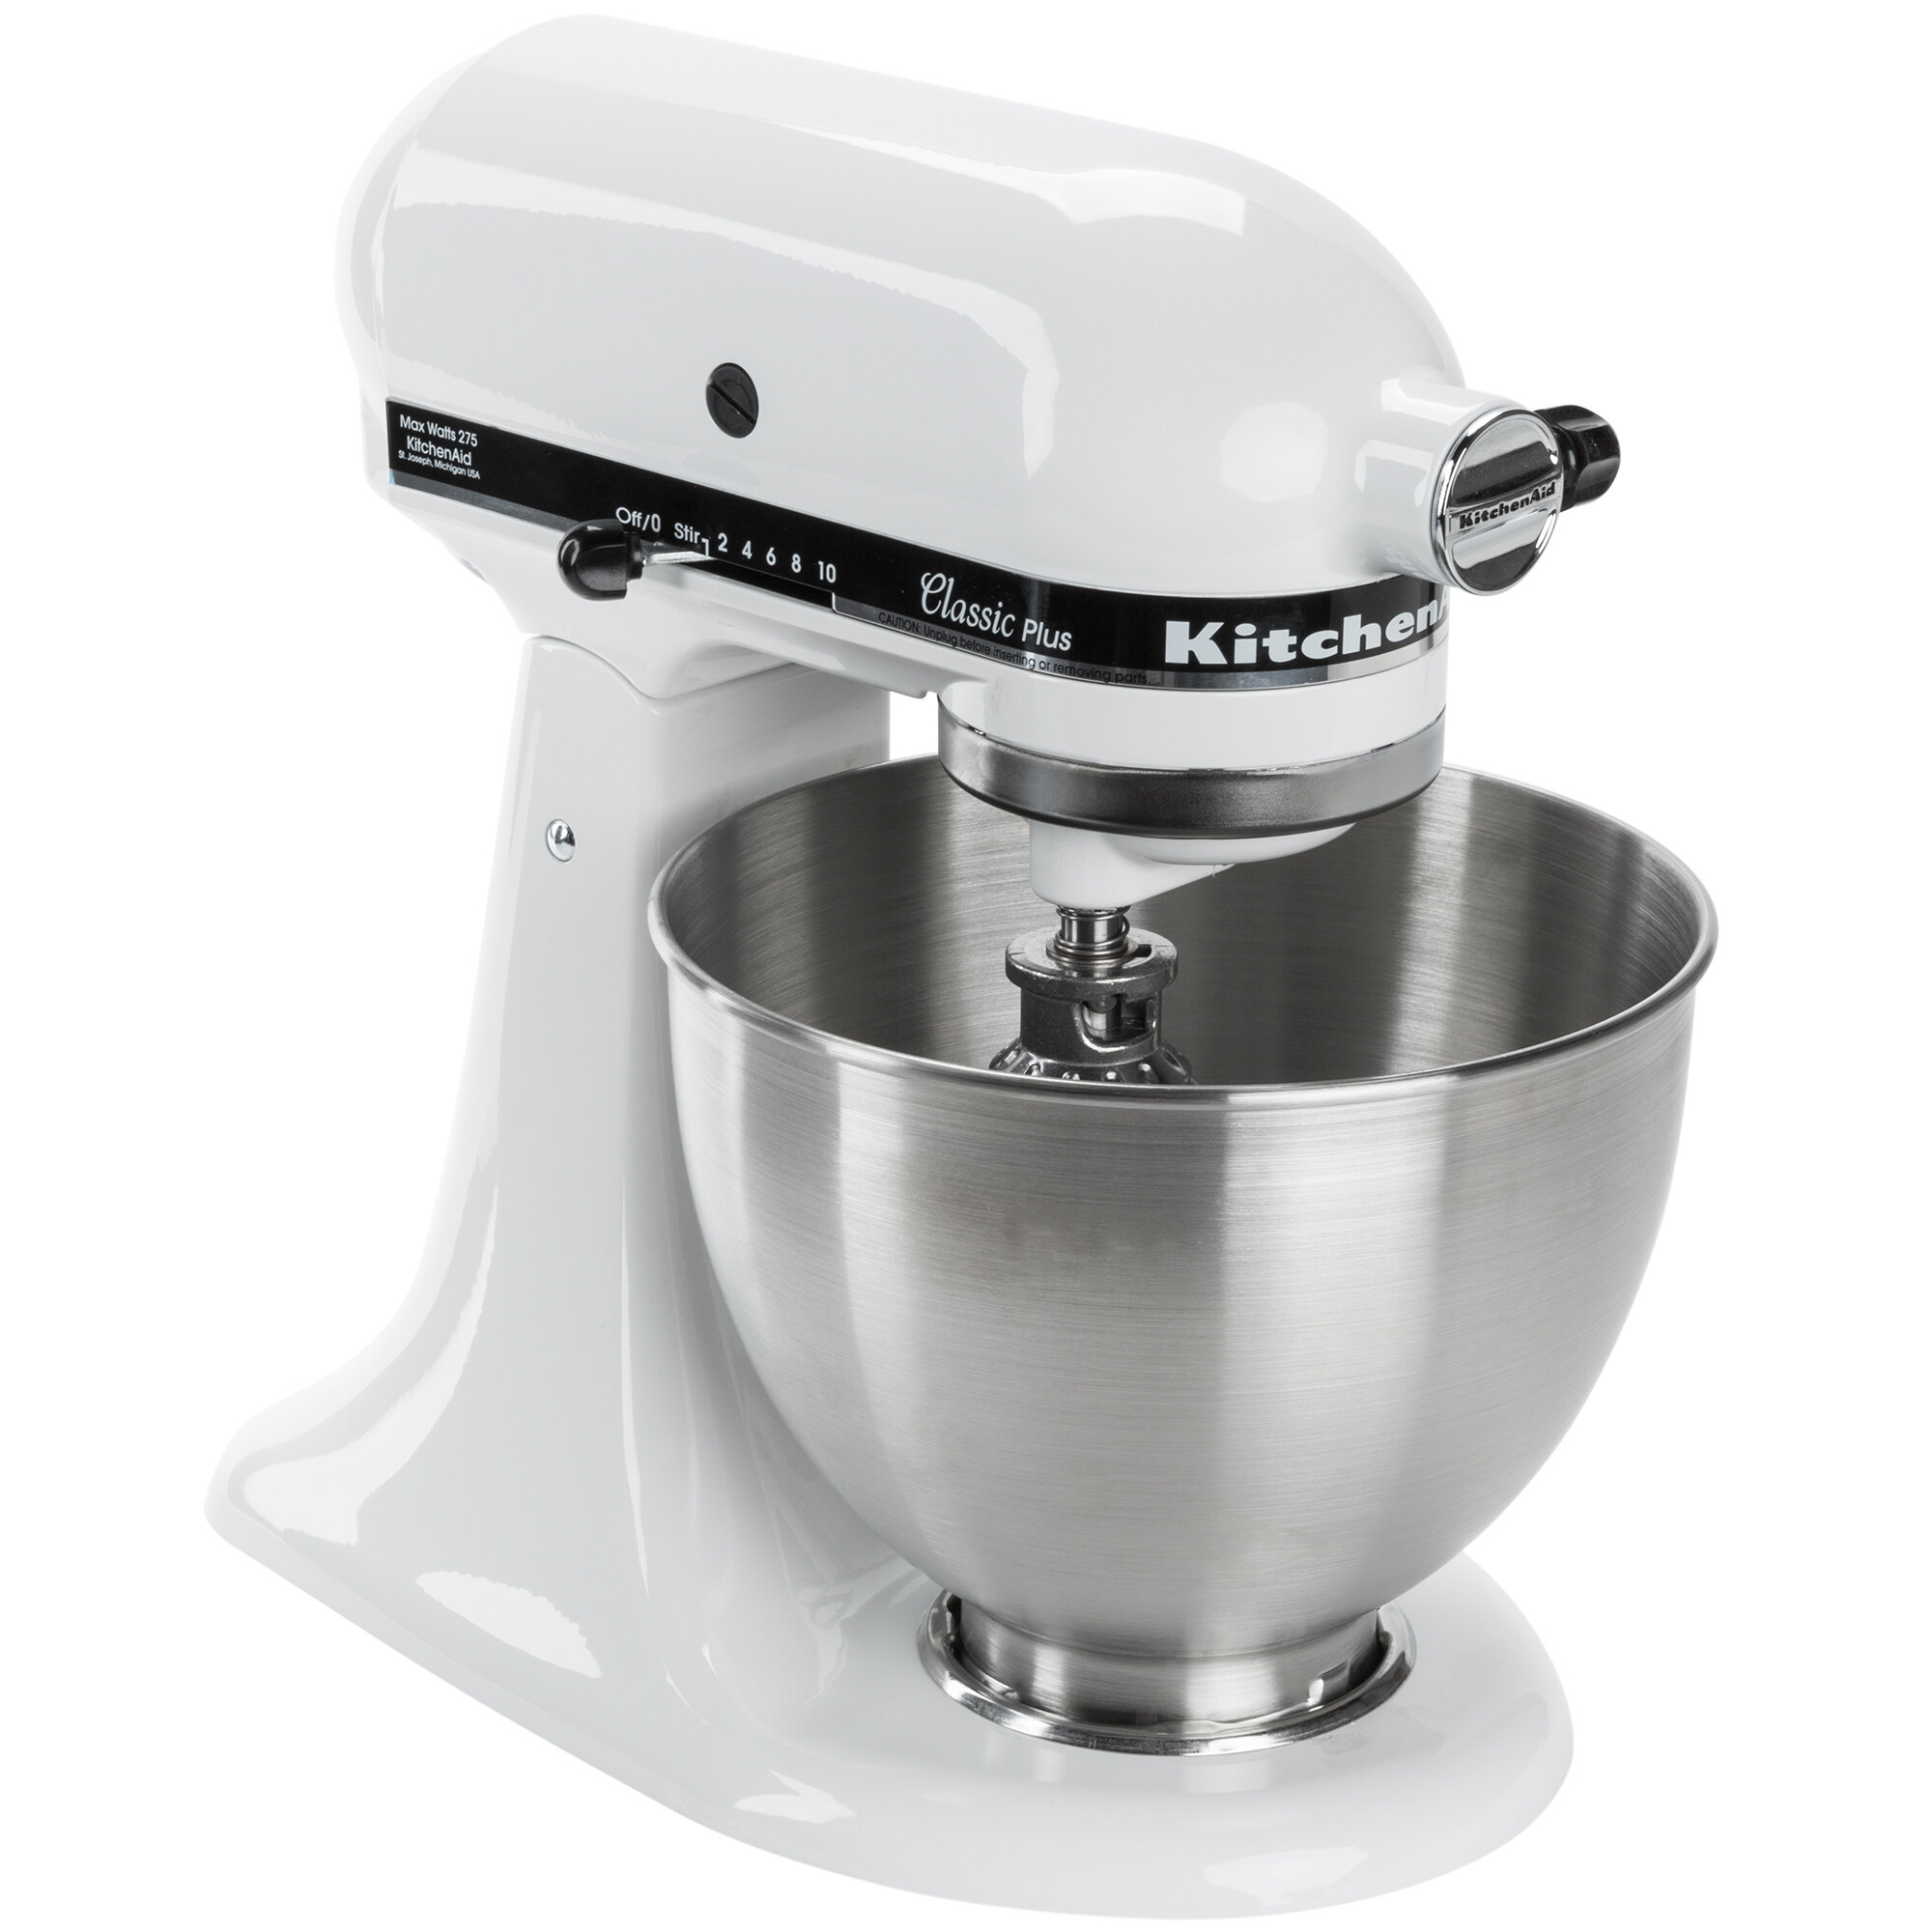 KitchenAid K45SBWH Stainless Steel 4.5 Qt. Mixing Bowl with Handle for Stainless Steel Kitchen Aid Mixer